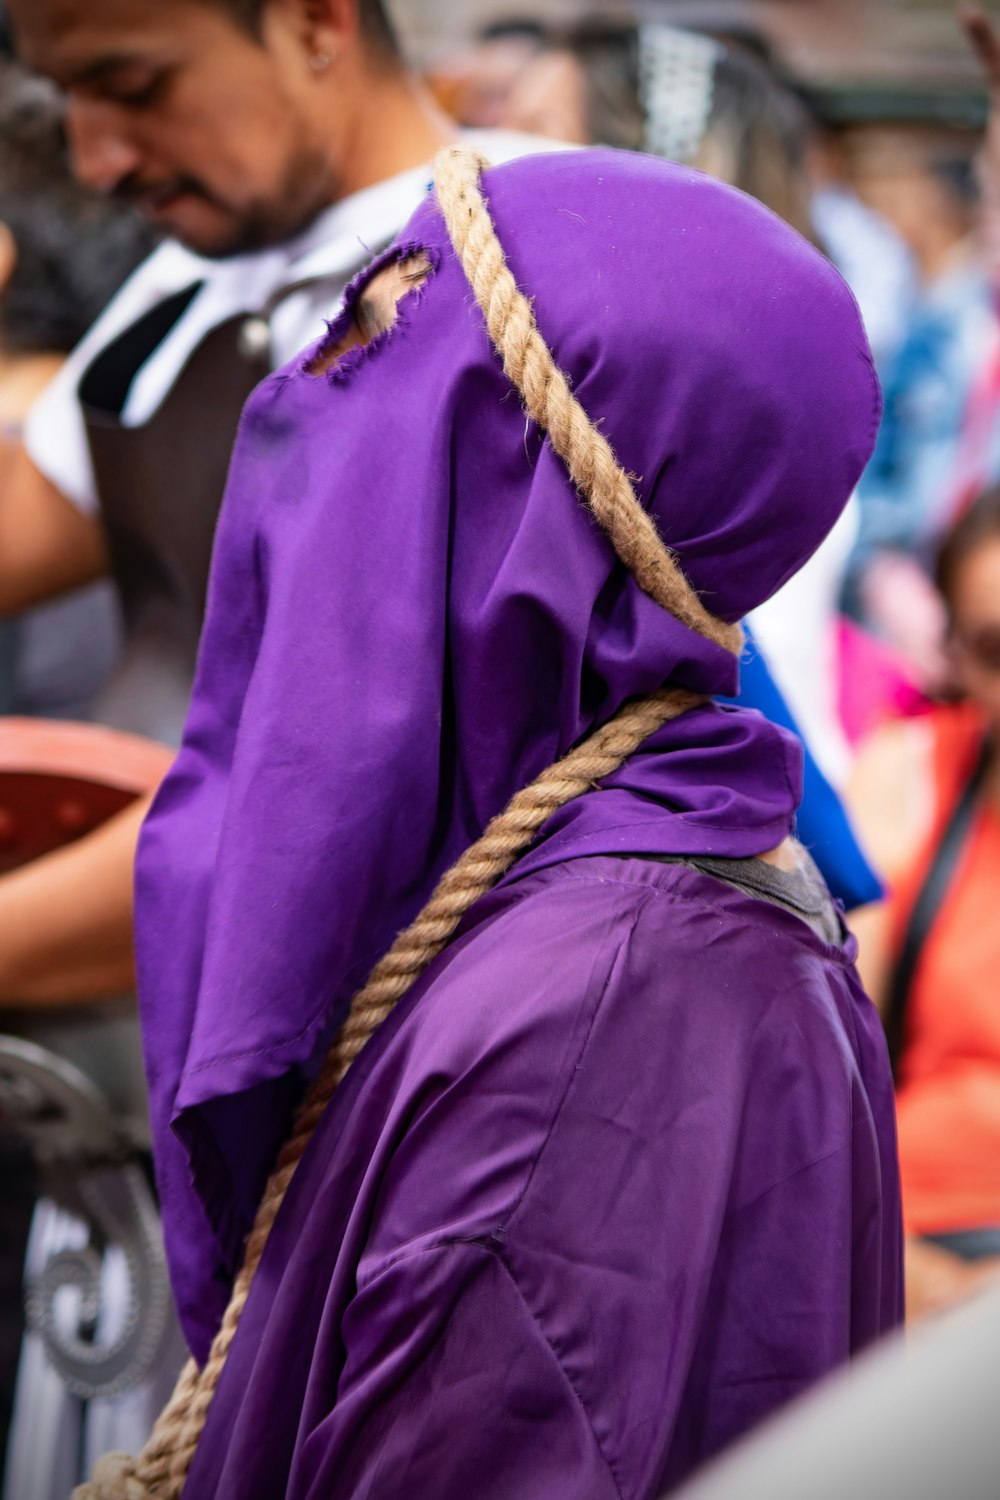 a person wearing a purple outfit and a rope